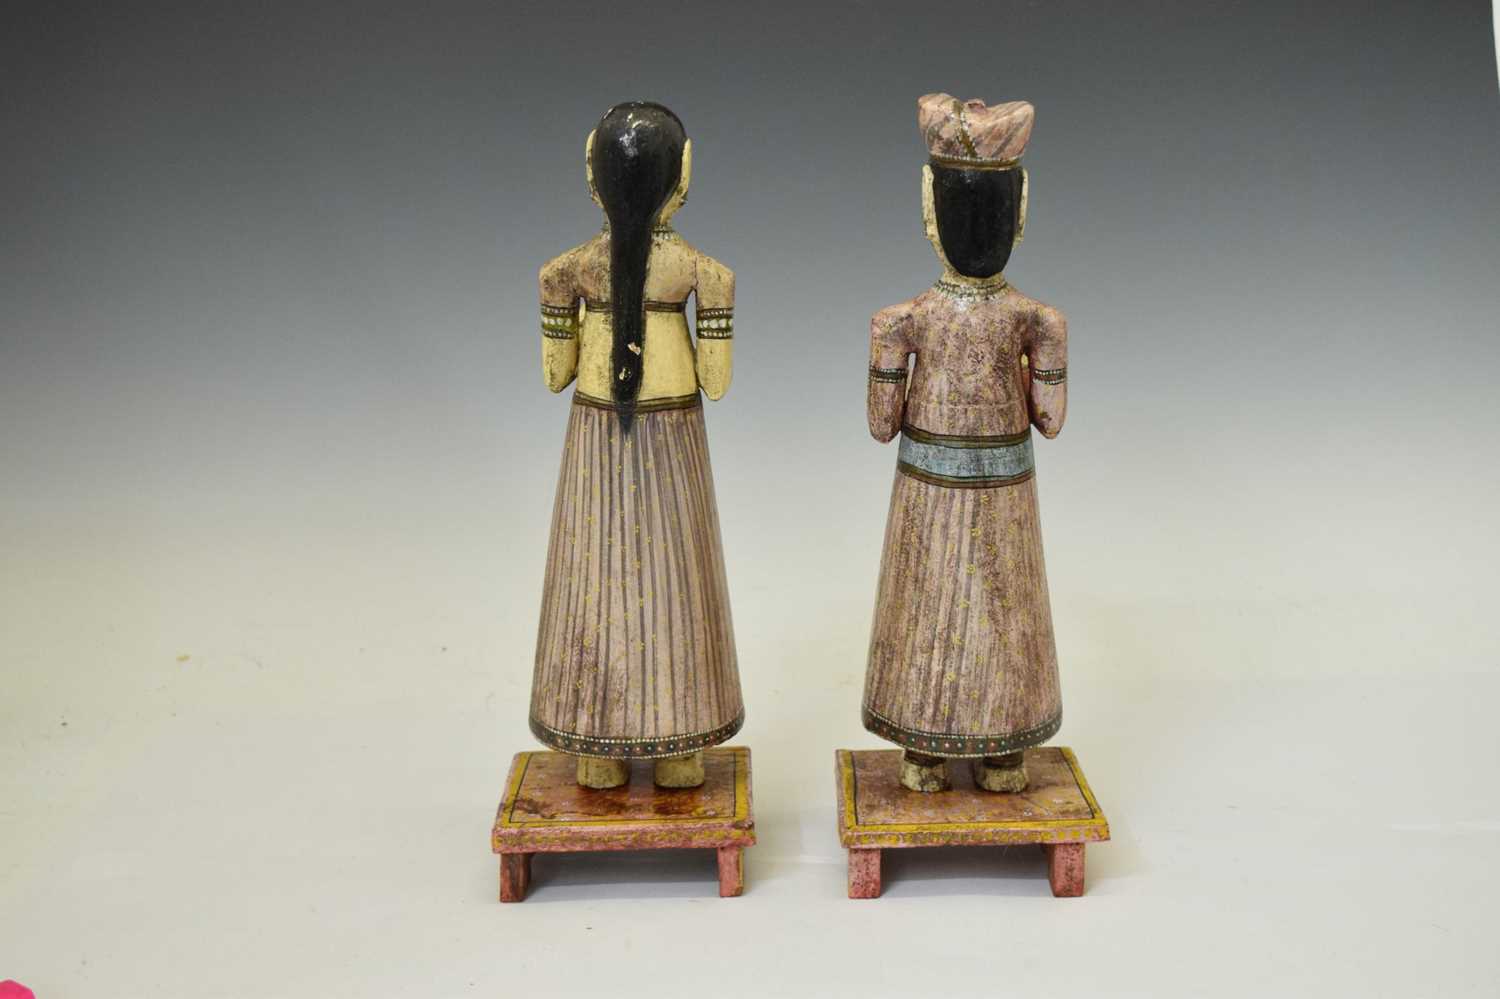 Pair of Indian painted wooden figures - Image 6 of 7